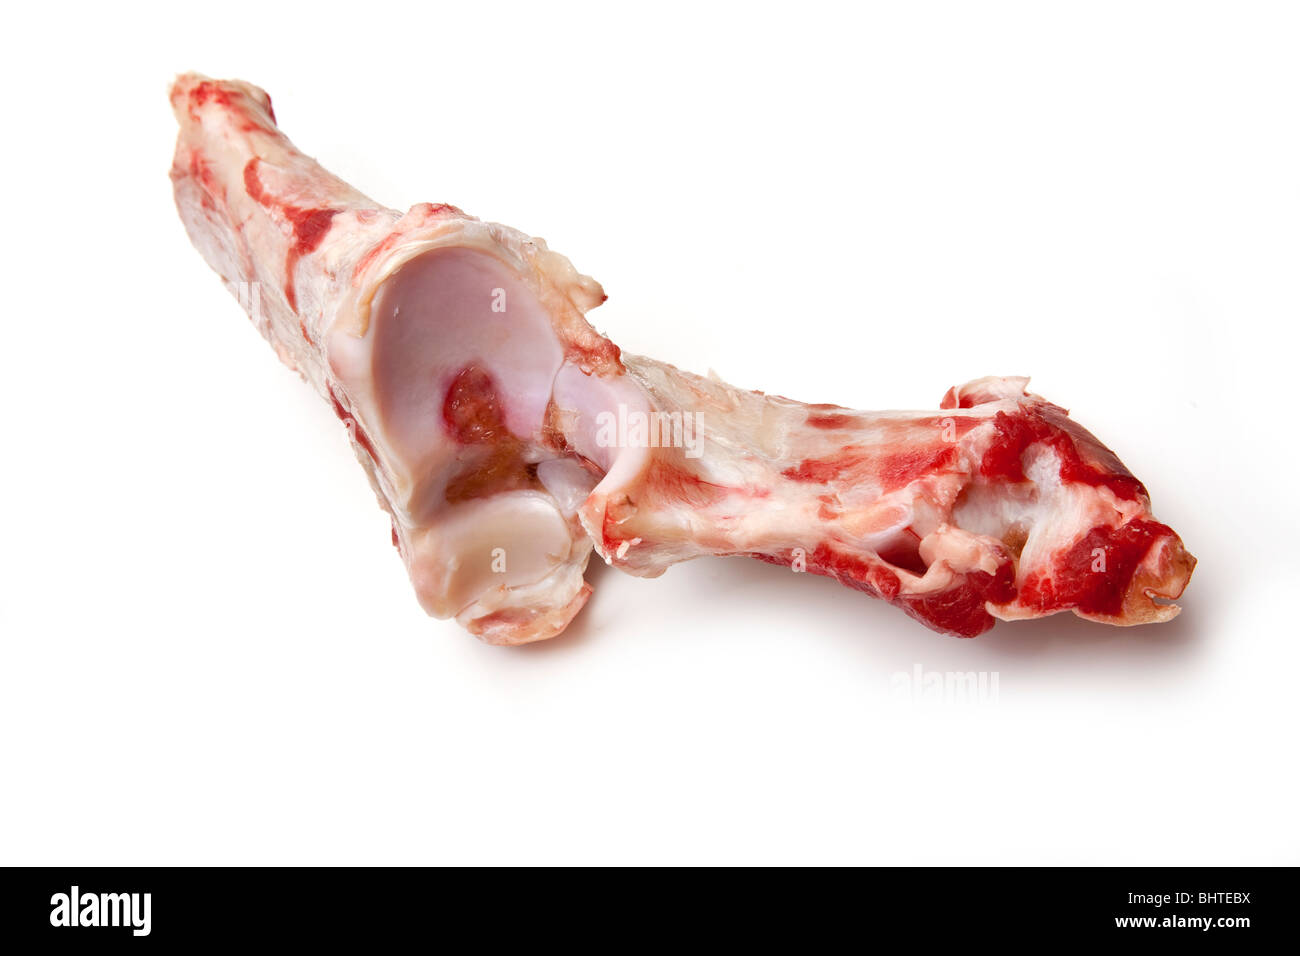 Beef knuckle dogs bone isolated on a white studio background. Stock Photo